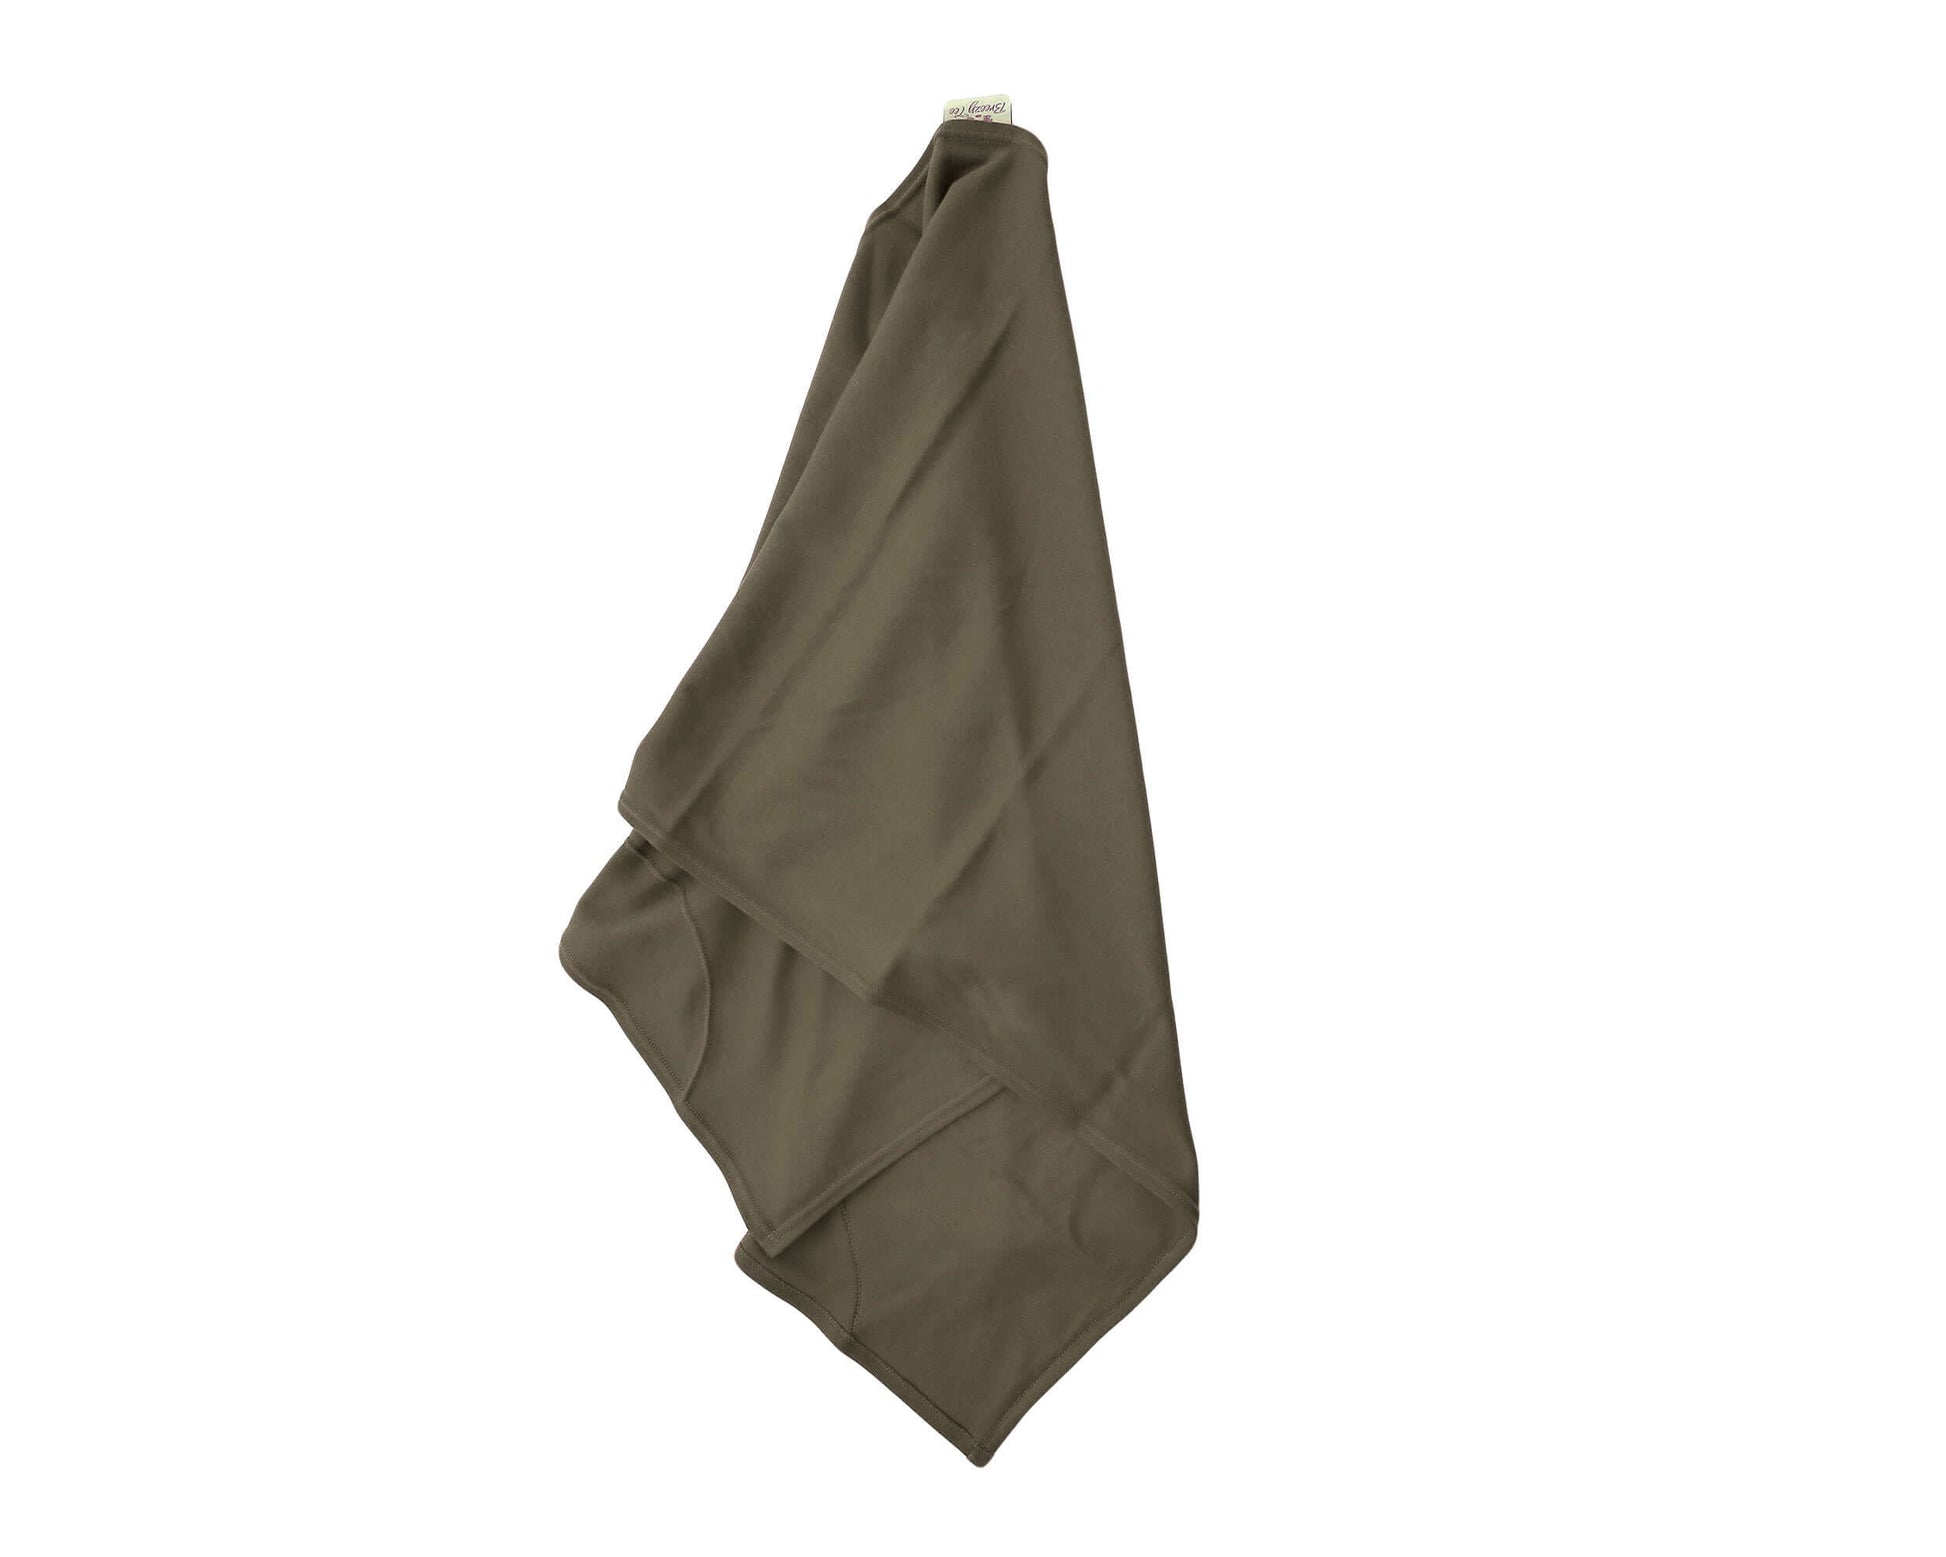 Khaki Olive T-Shirt Hair Towel for Curly, Wavy, and Straight Hair - Soft, Absorbent, and Eco-Friendly